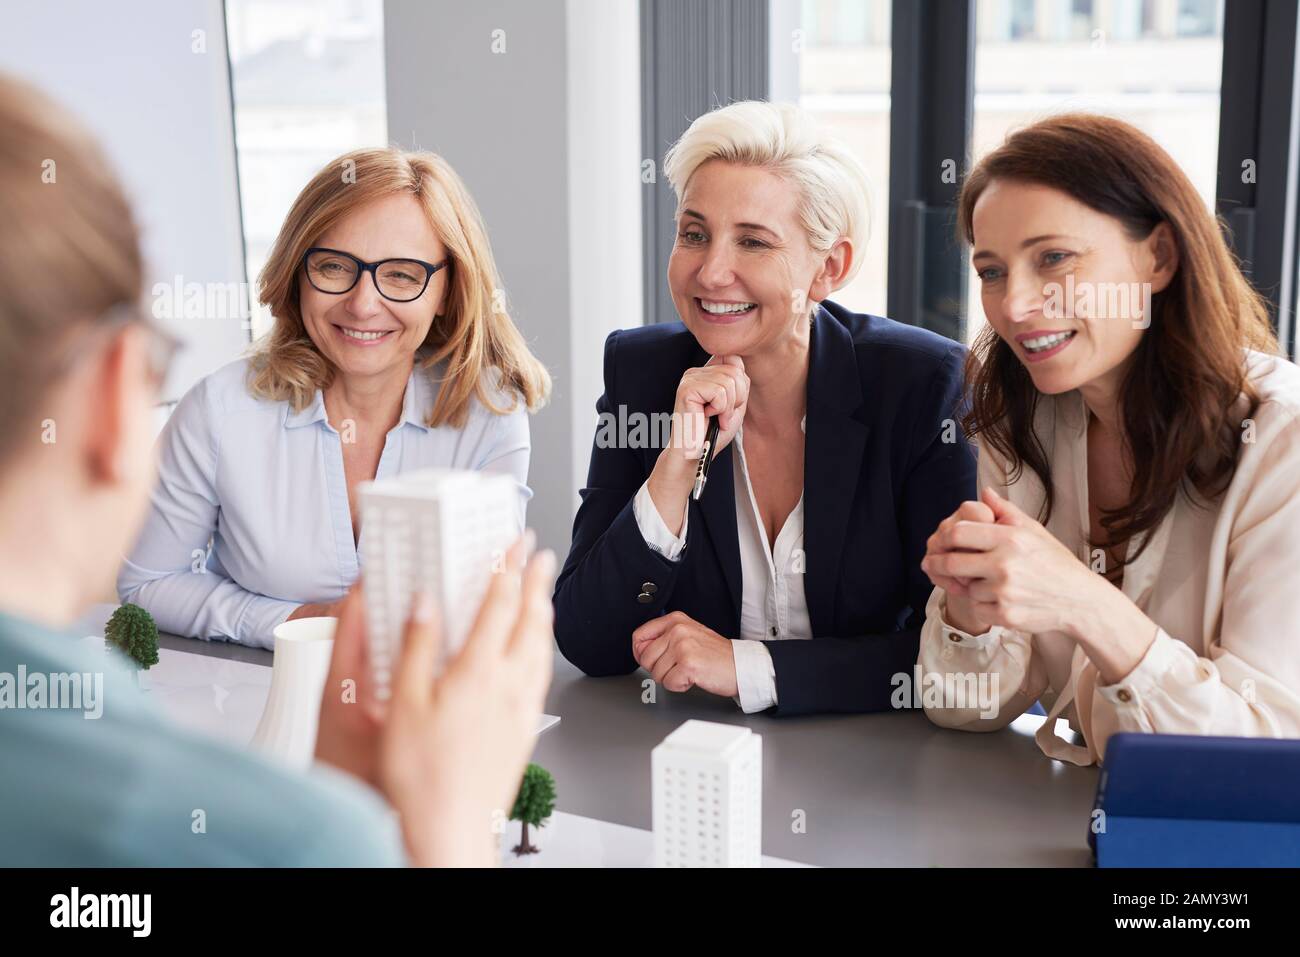 Three mature businesswomen having a conversation at conference table Stock Photo